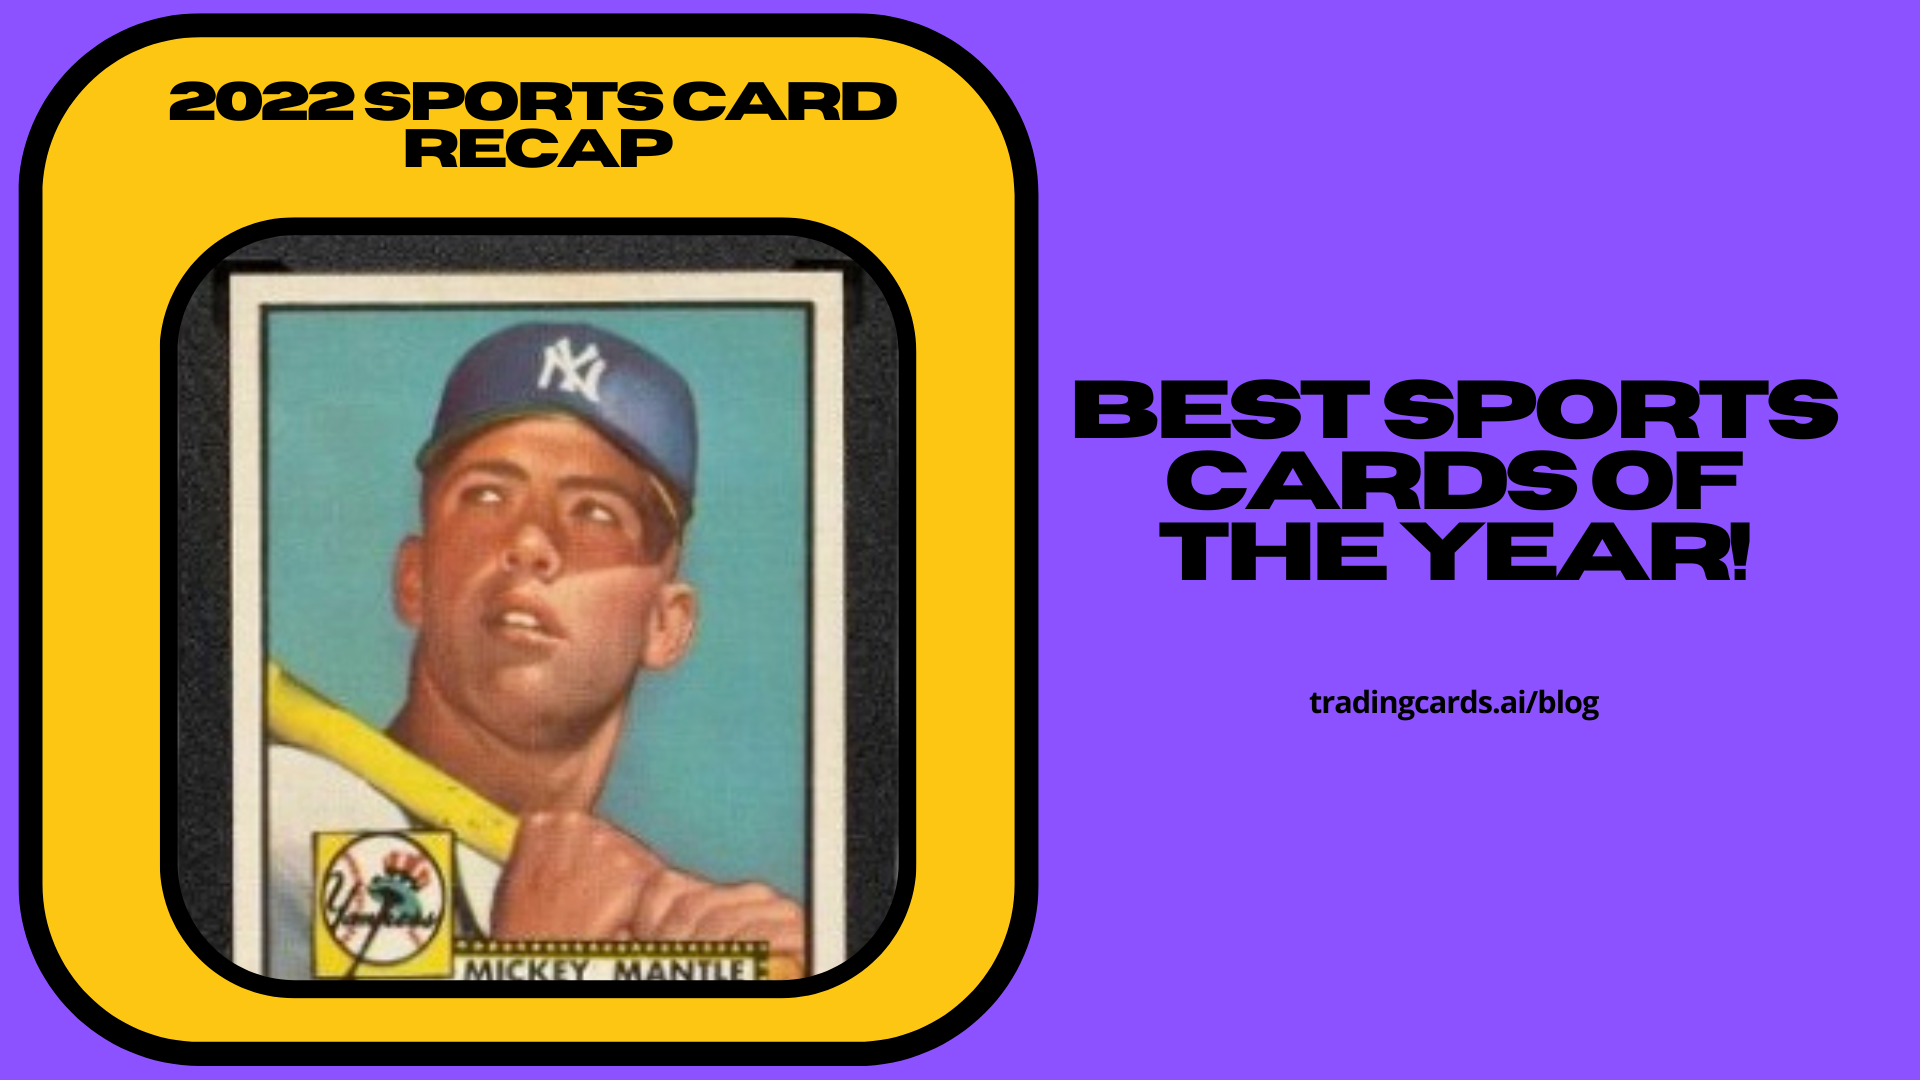 2022 Sports Card Recap: Best Sports Cards of the Year!